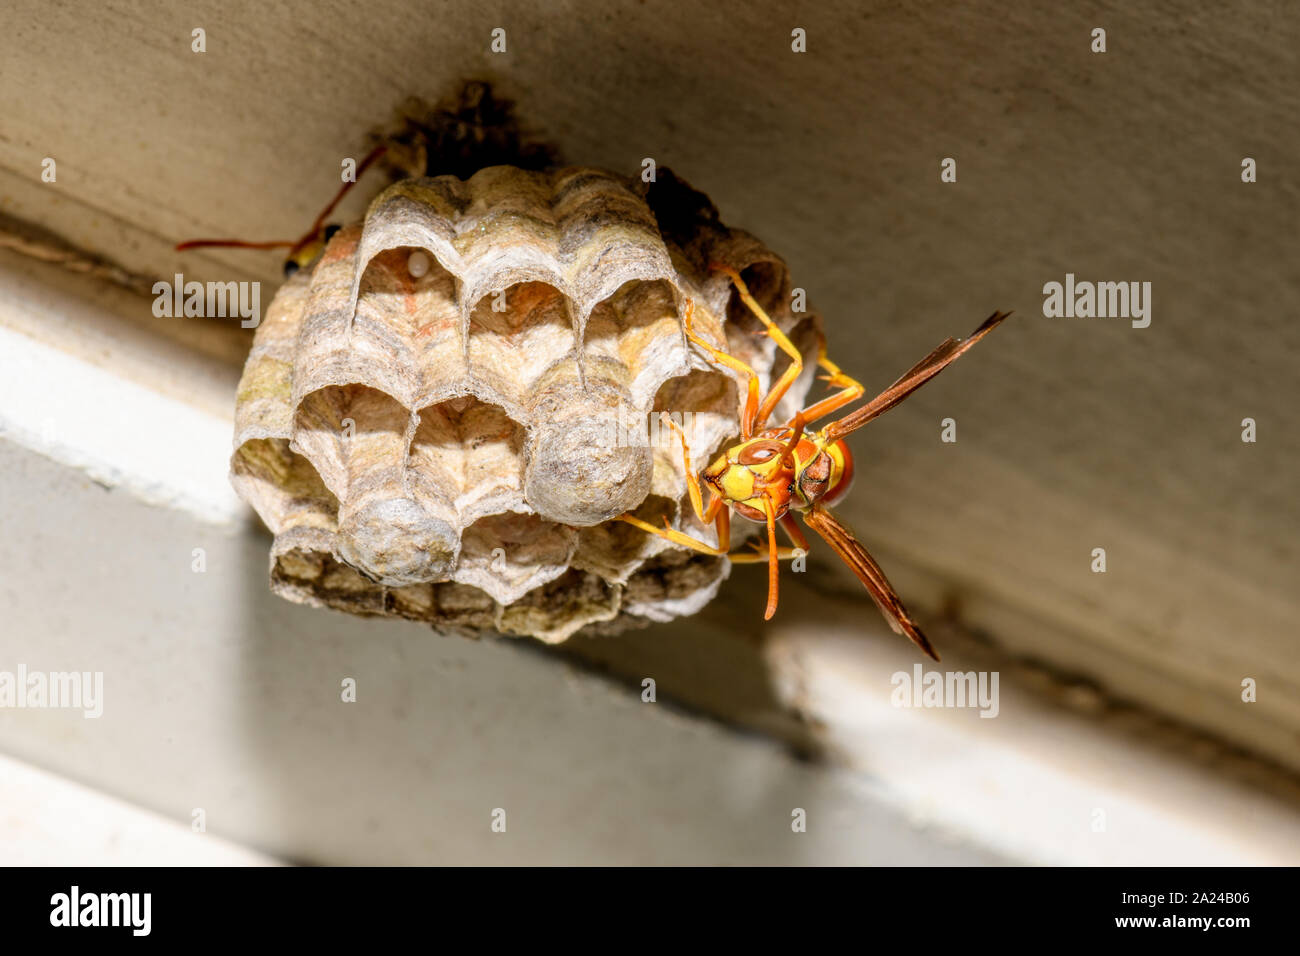 Paper Wasp - Polistes exclamans - guarding a nest with eggs and pupa Stock Photo